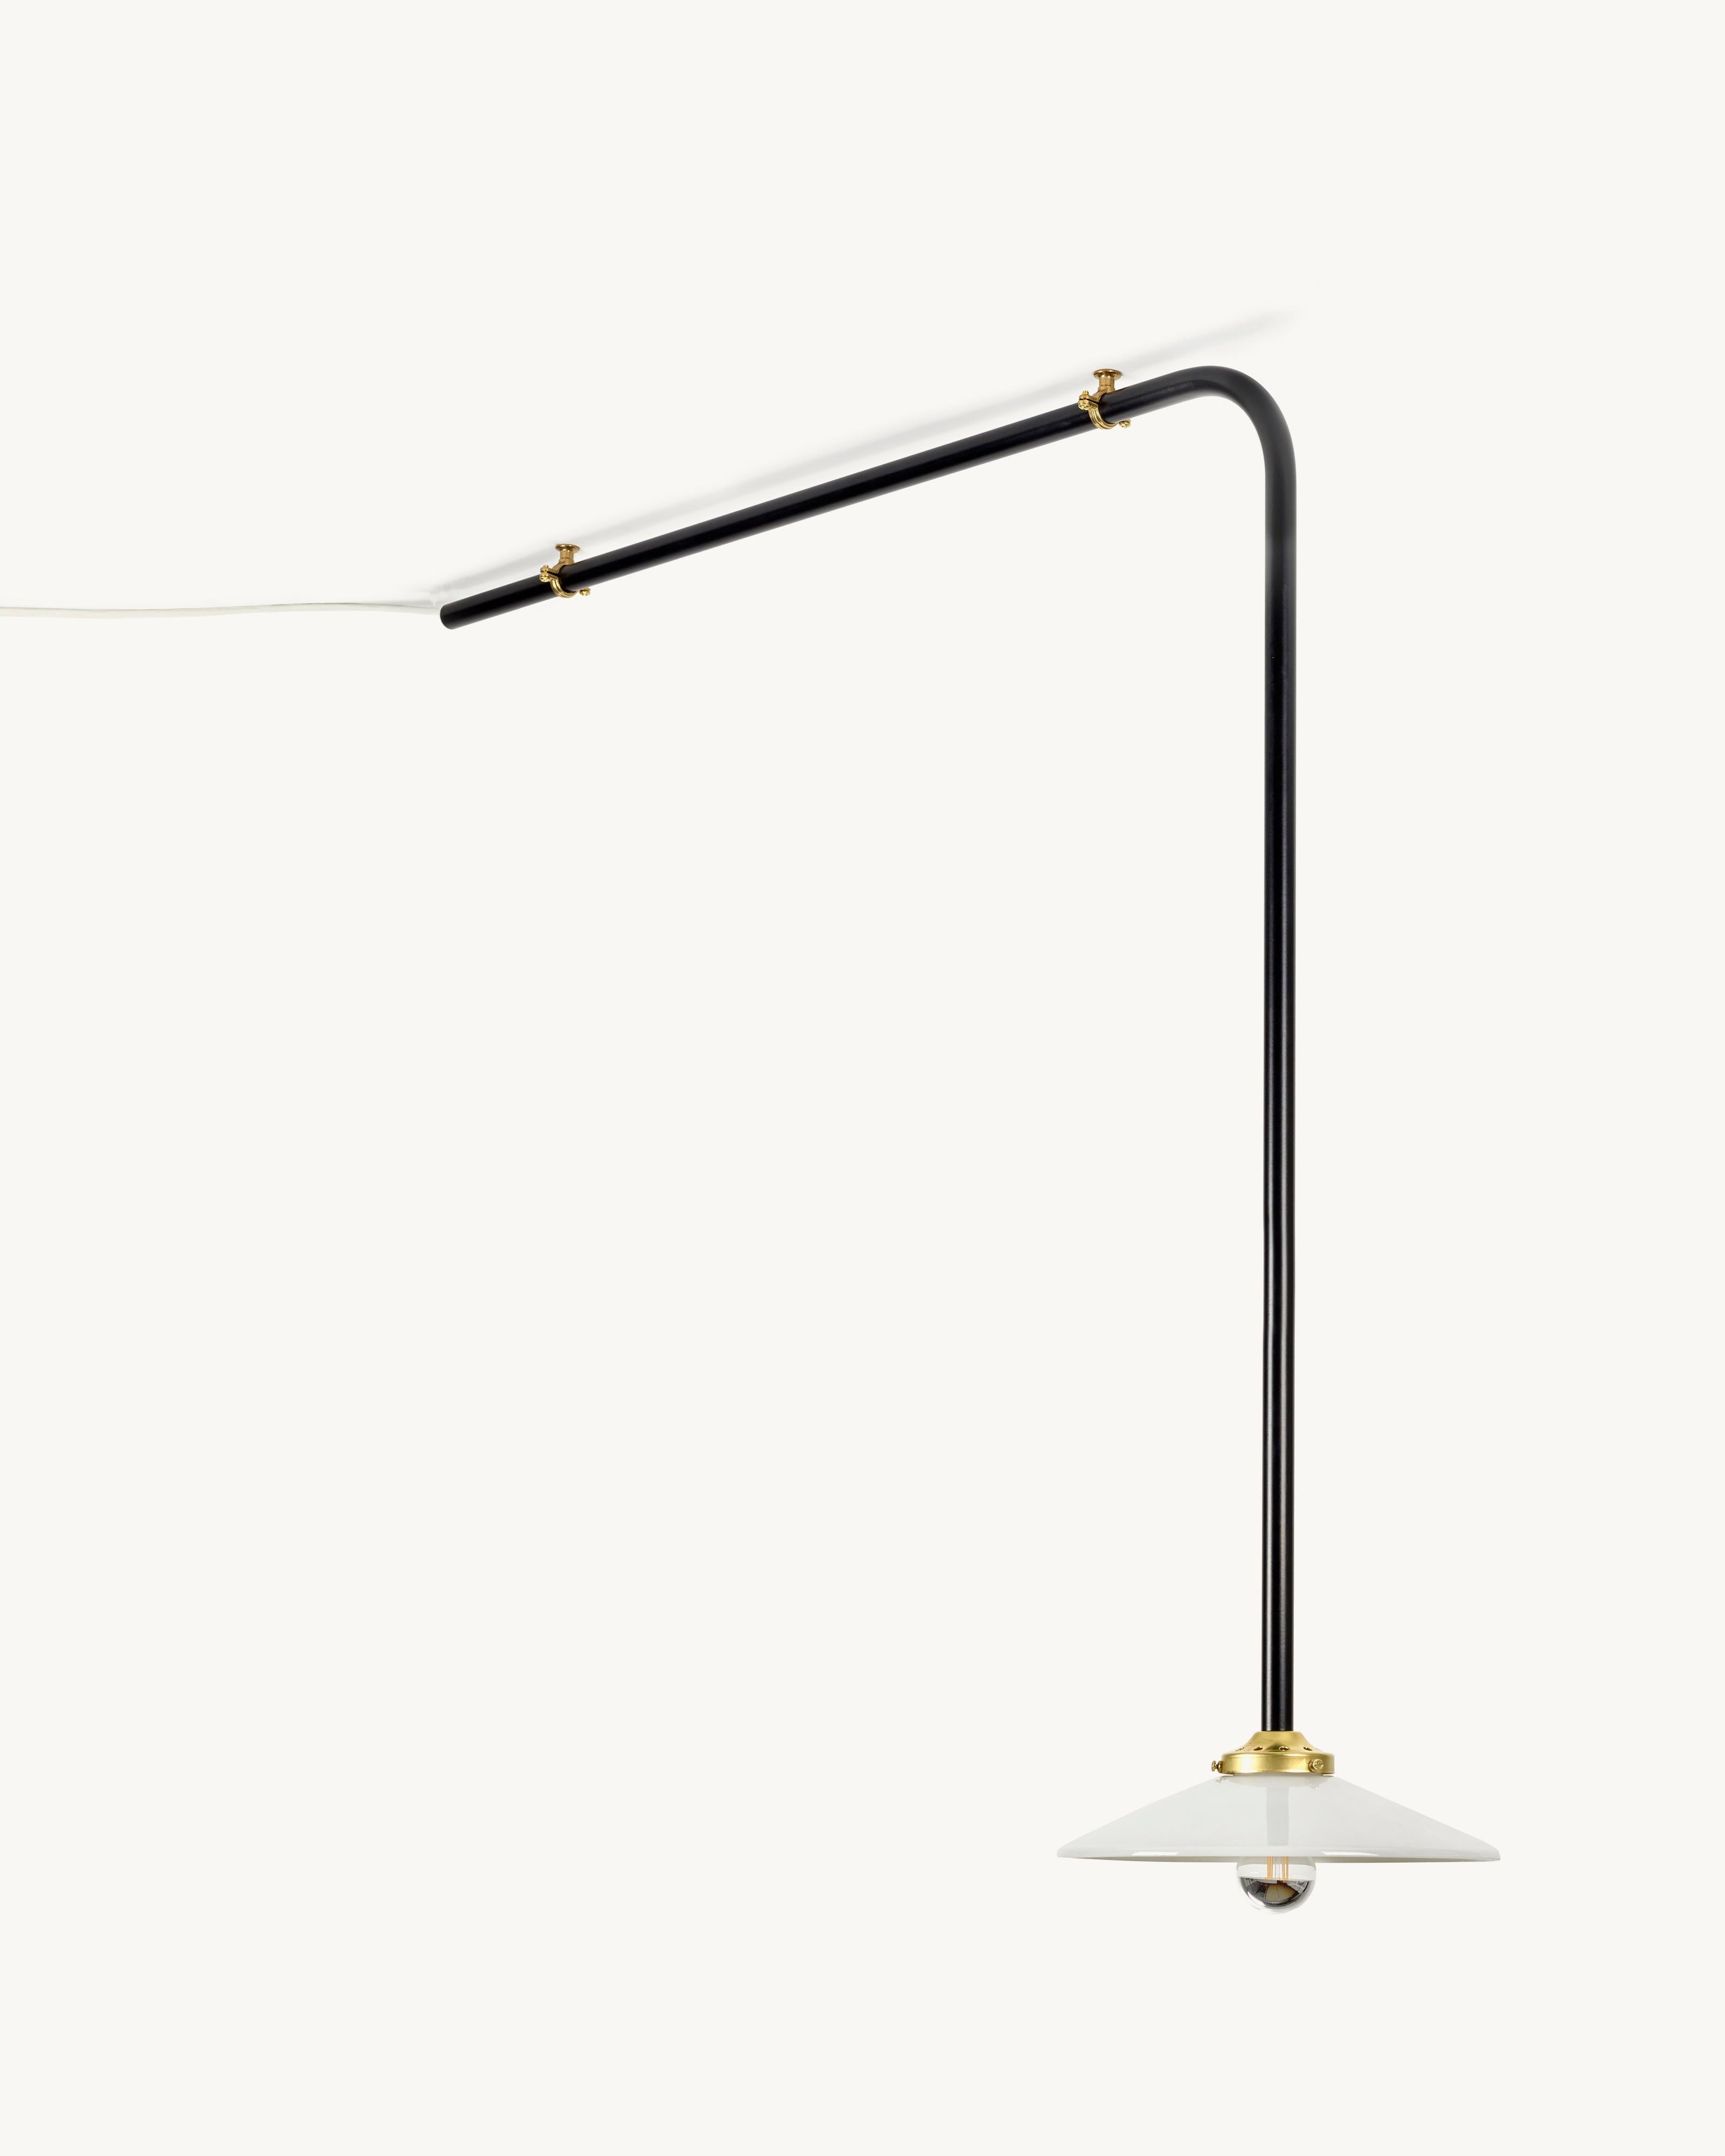 Steel Contemporary Ceiling Lamp N°1 by Muller Van Severen x Valerie Objects, Brass For Sale